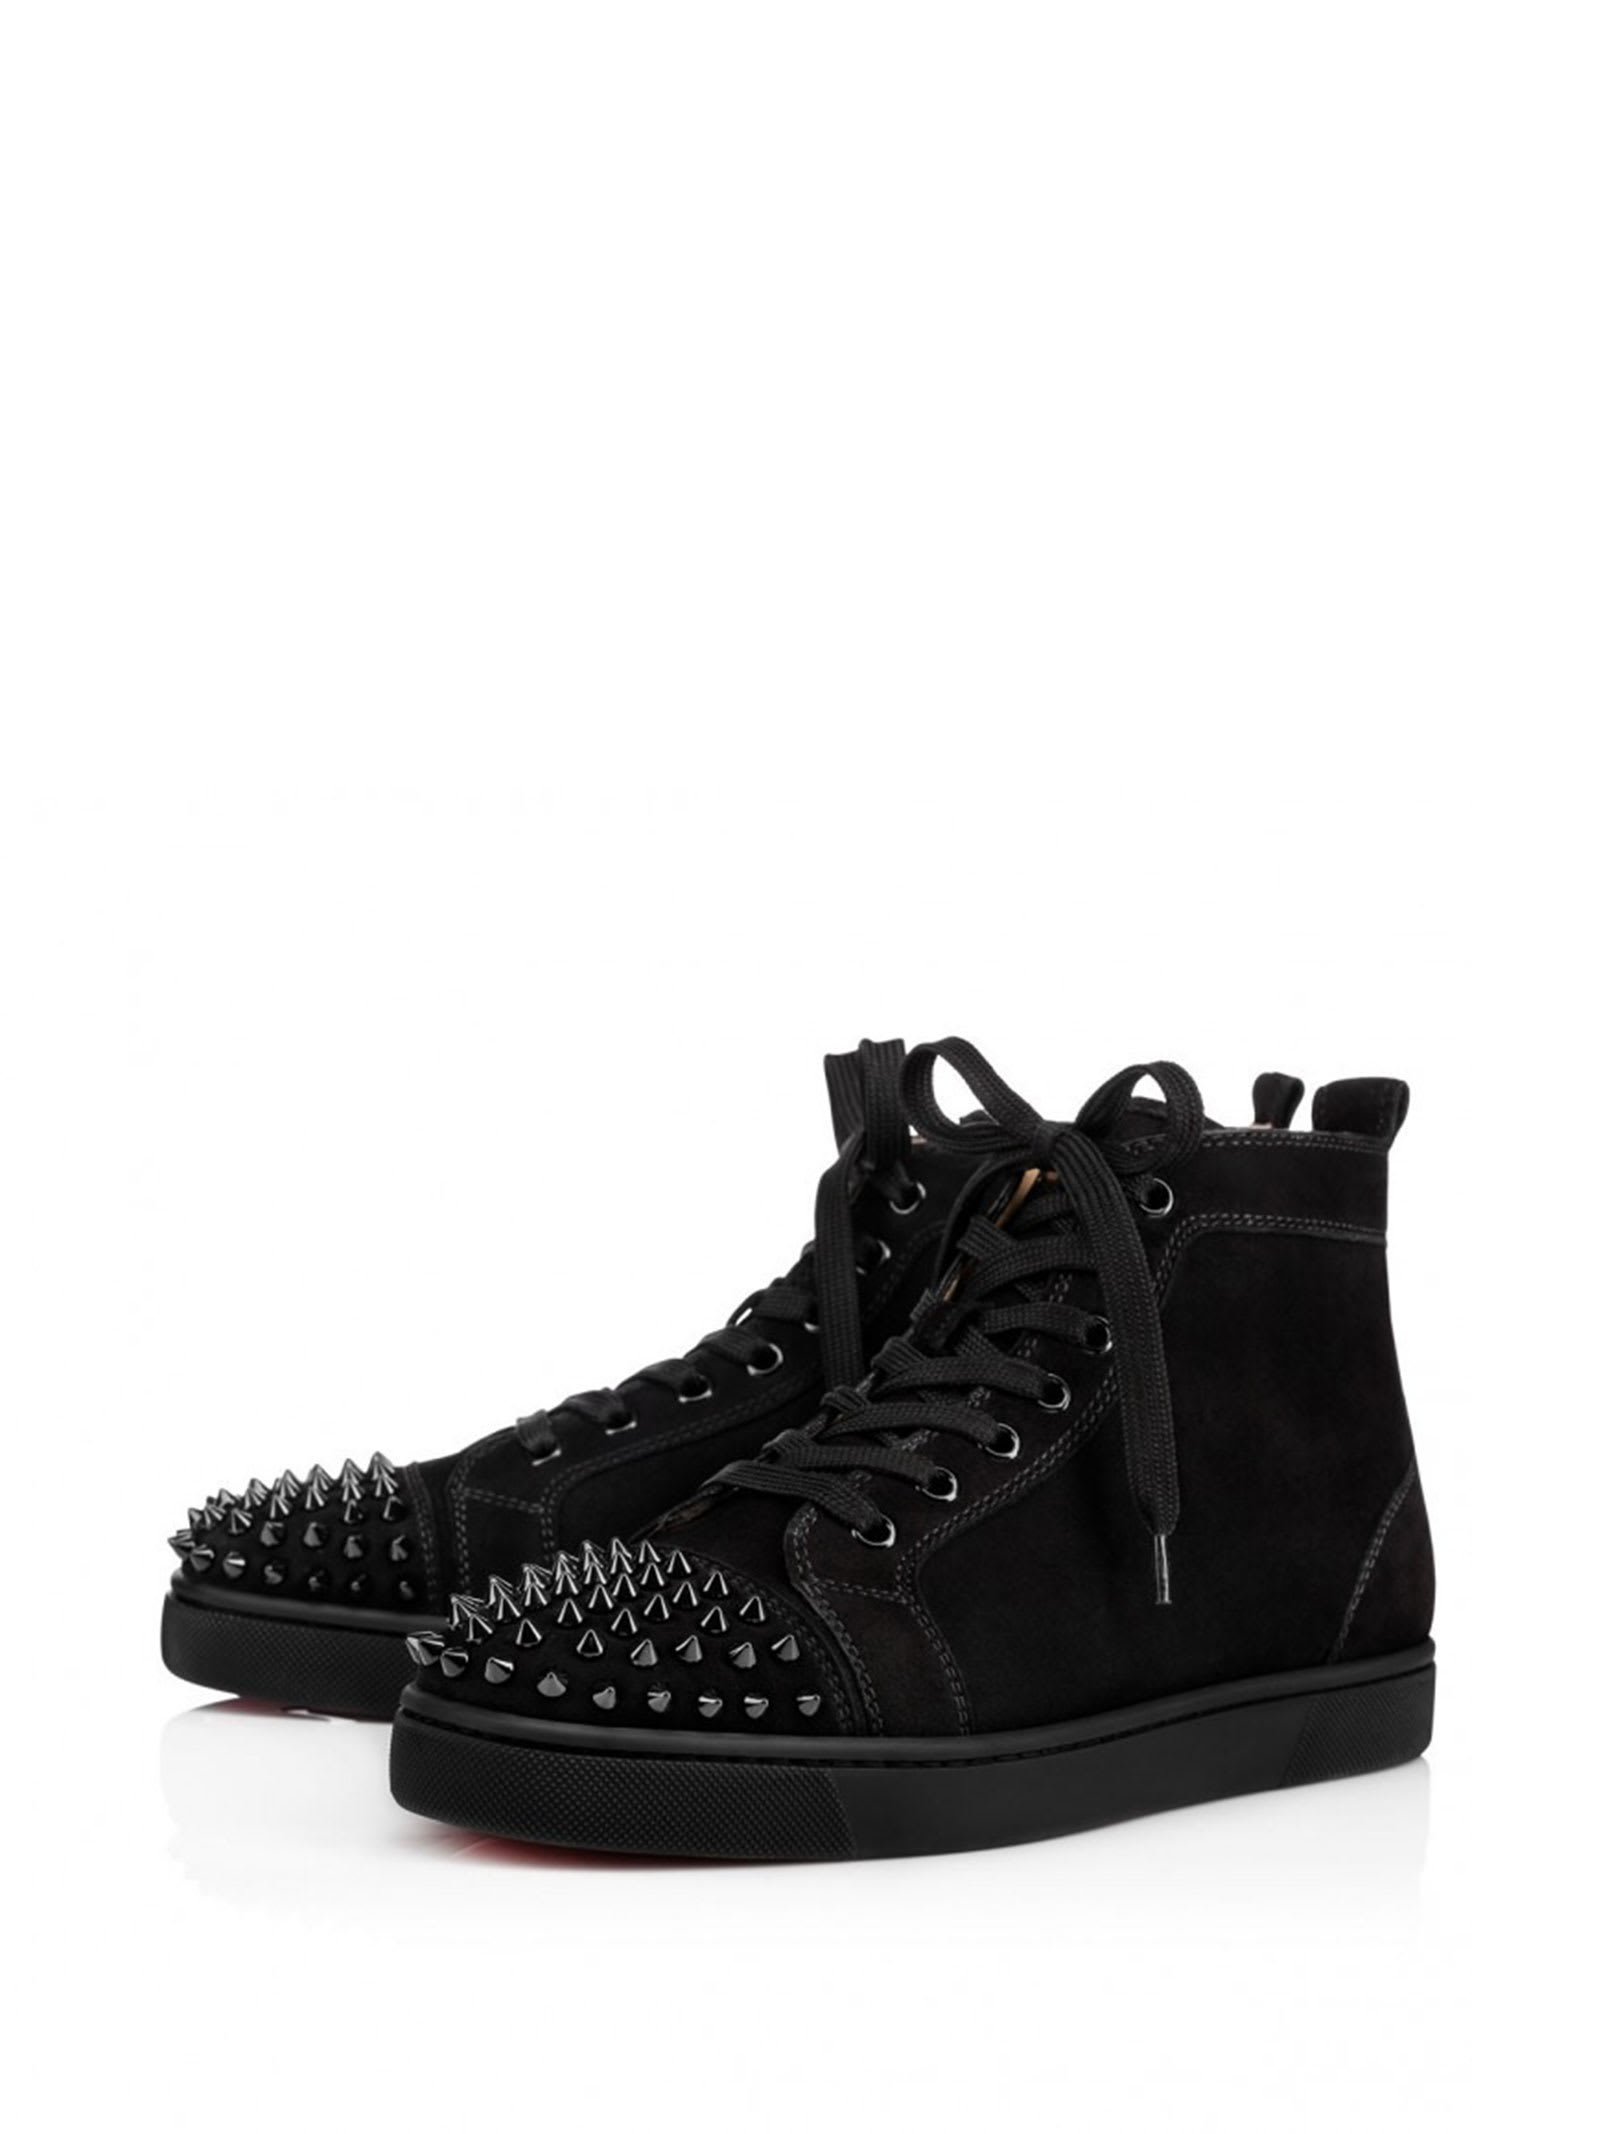 Lou Spikes - High-top sneakers - Calf leather and spikes - Black - Christian  Louboutin